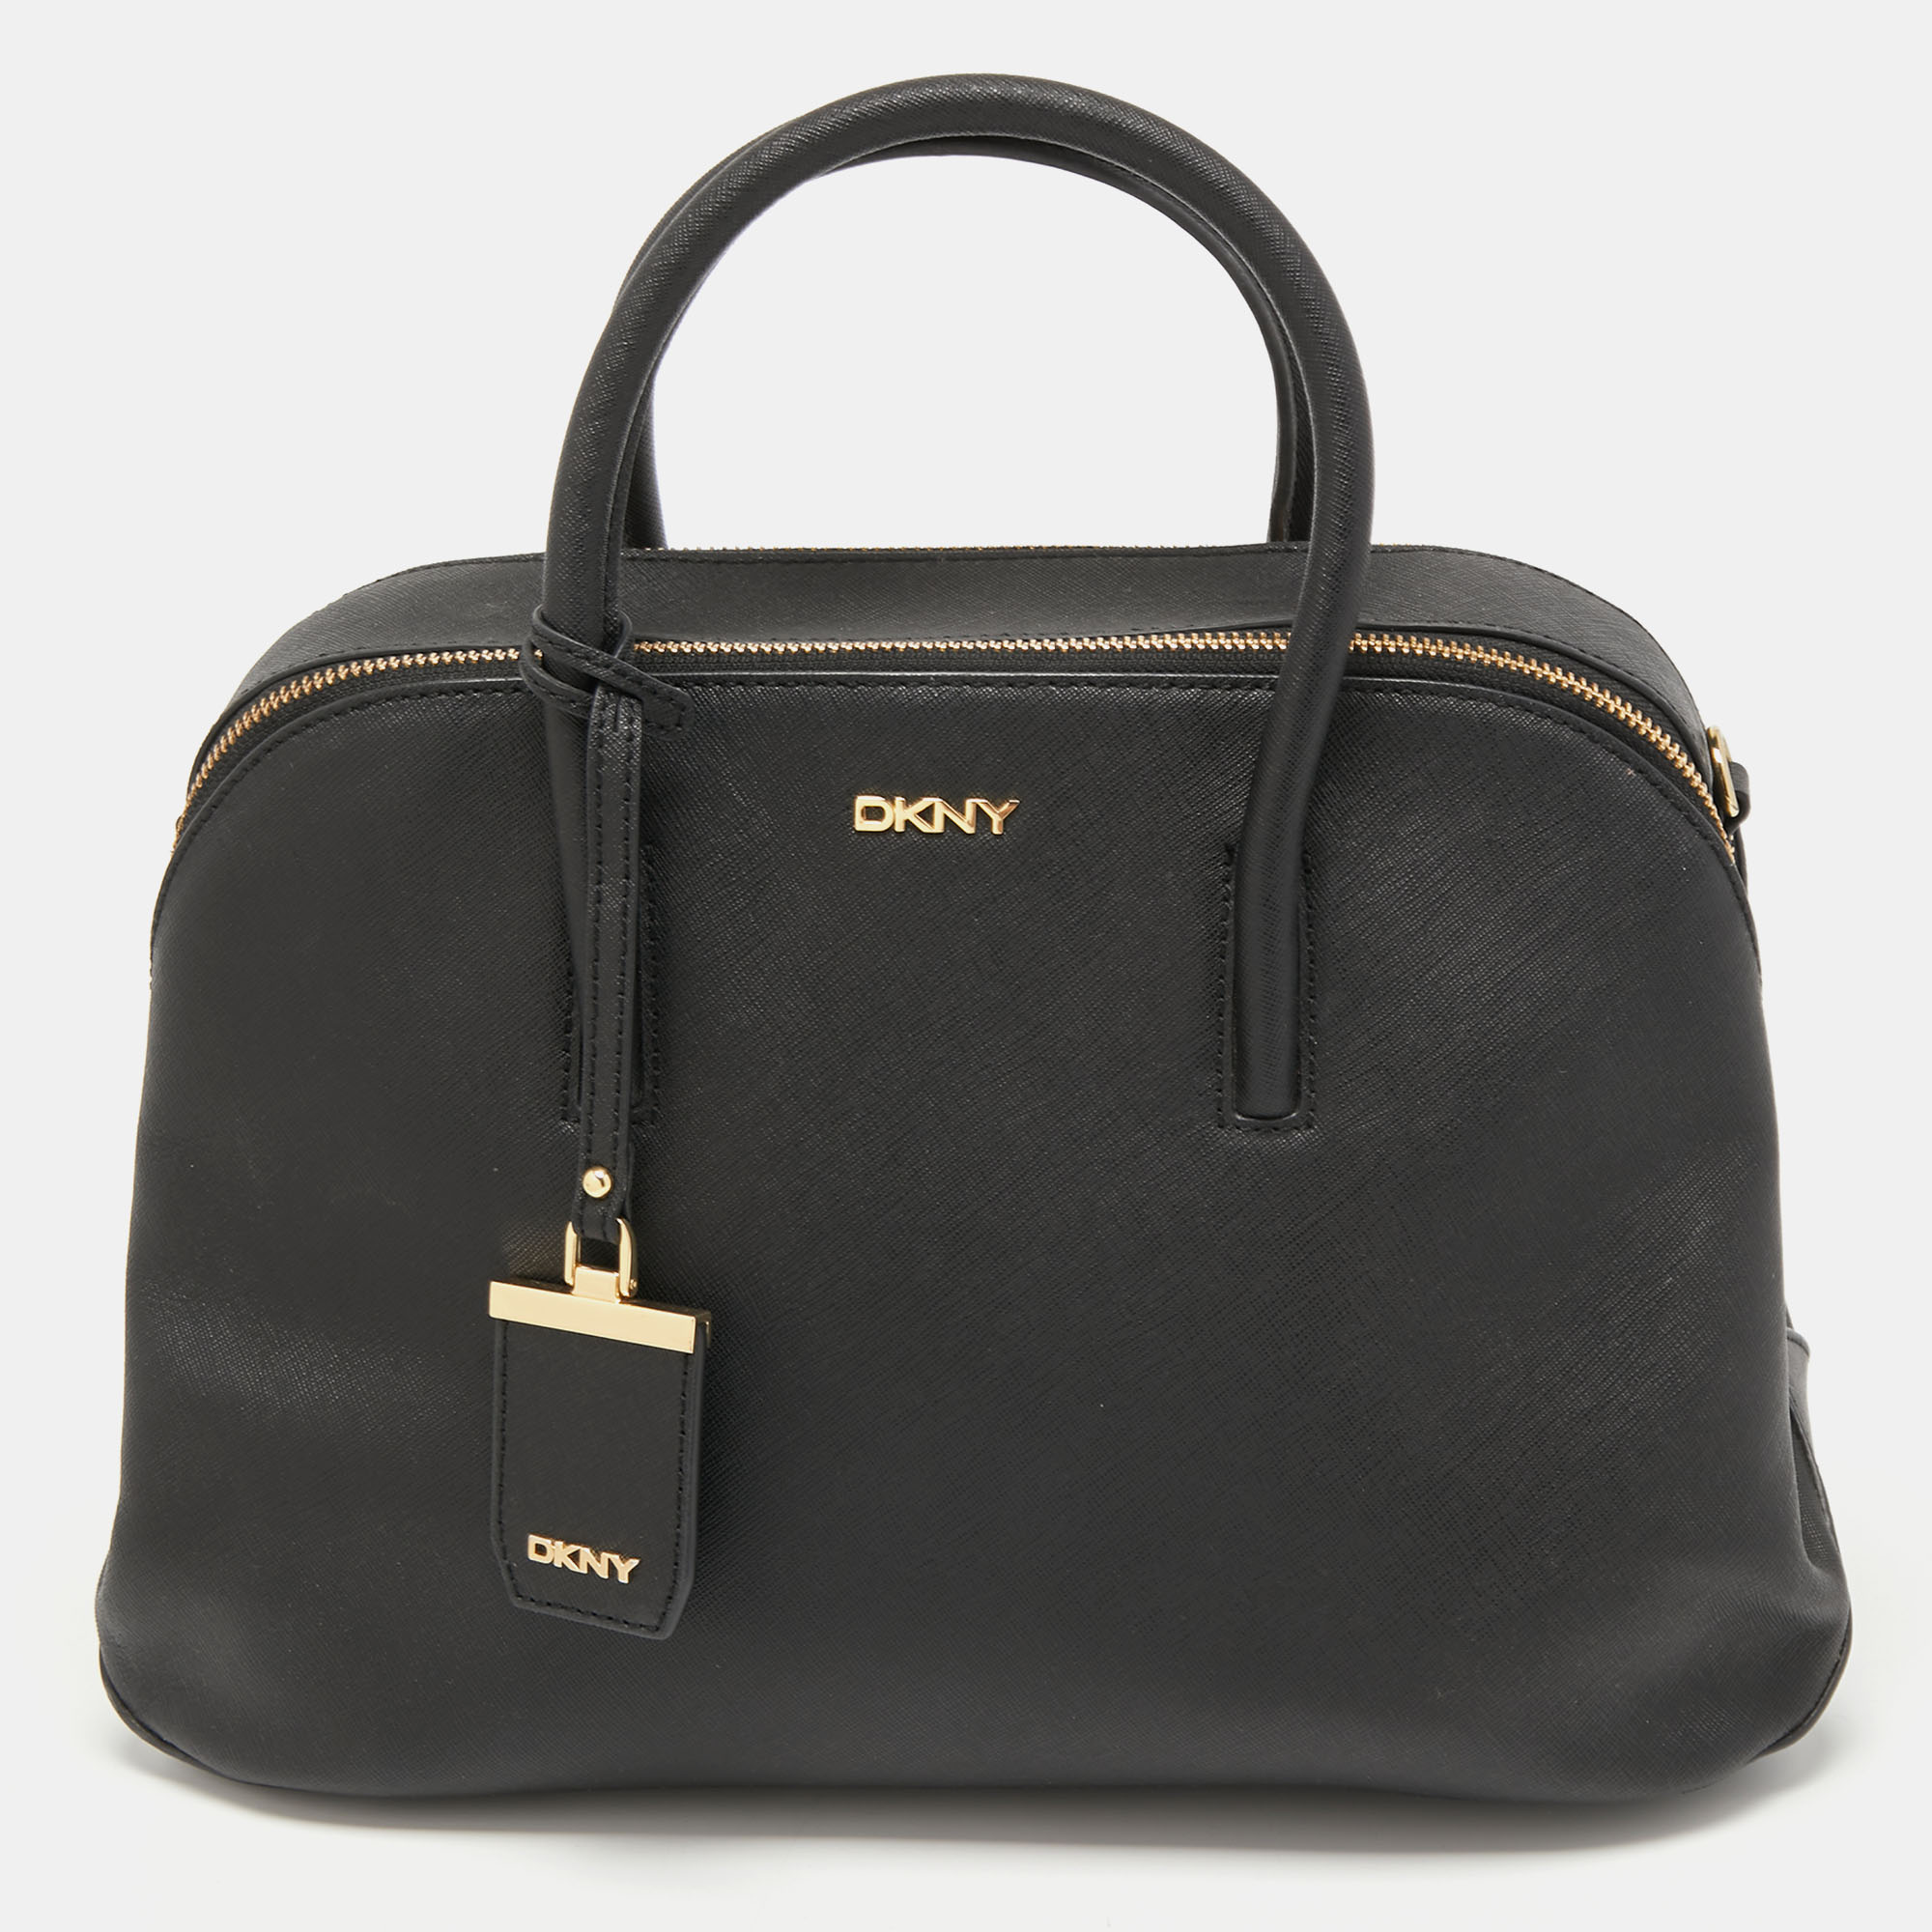 Pre-owned Dkny Black Saffiano Leather Double Zip Satchel